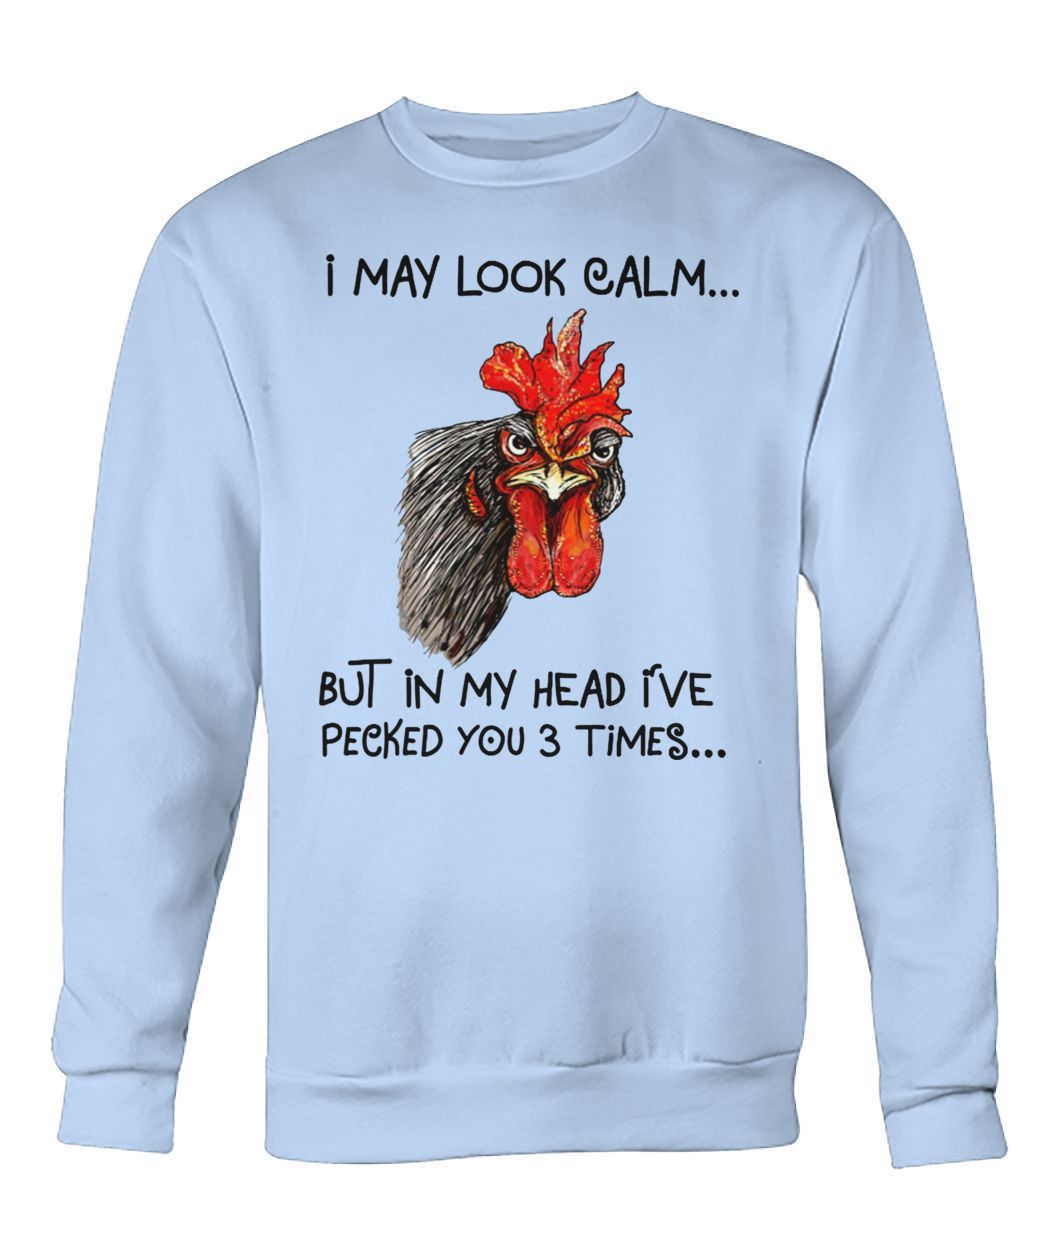 Chicken I may look calm but in my head I've pecked you 3 times crew neck sweatshirt